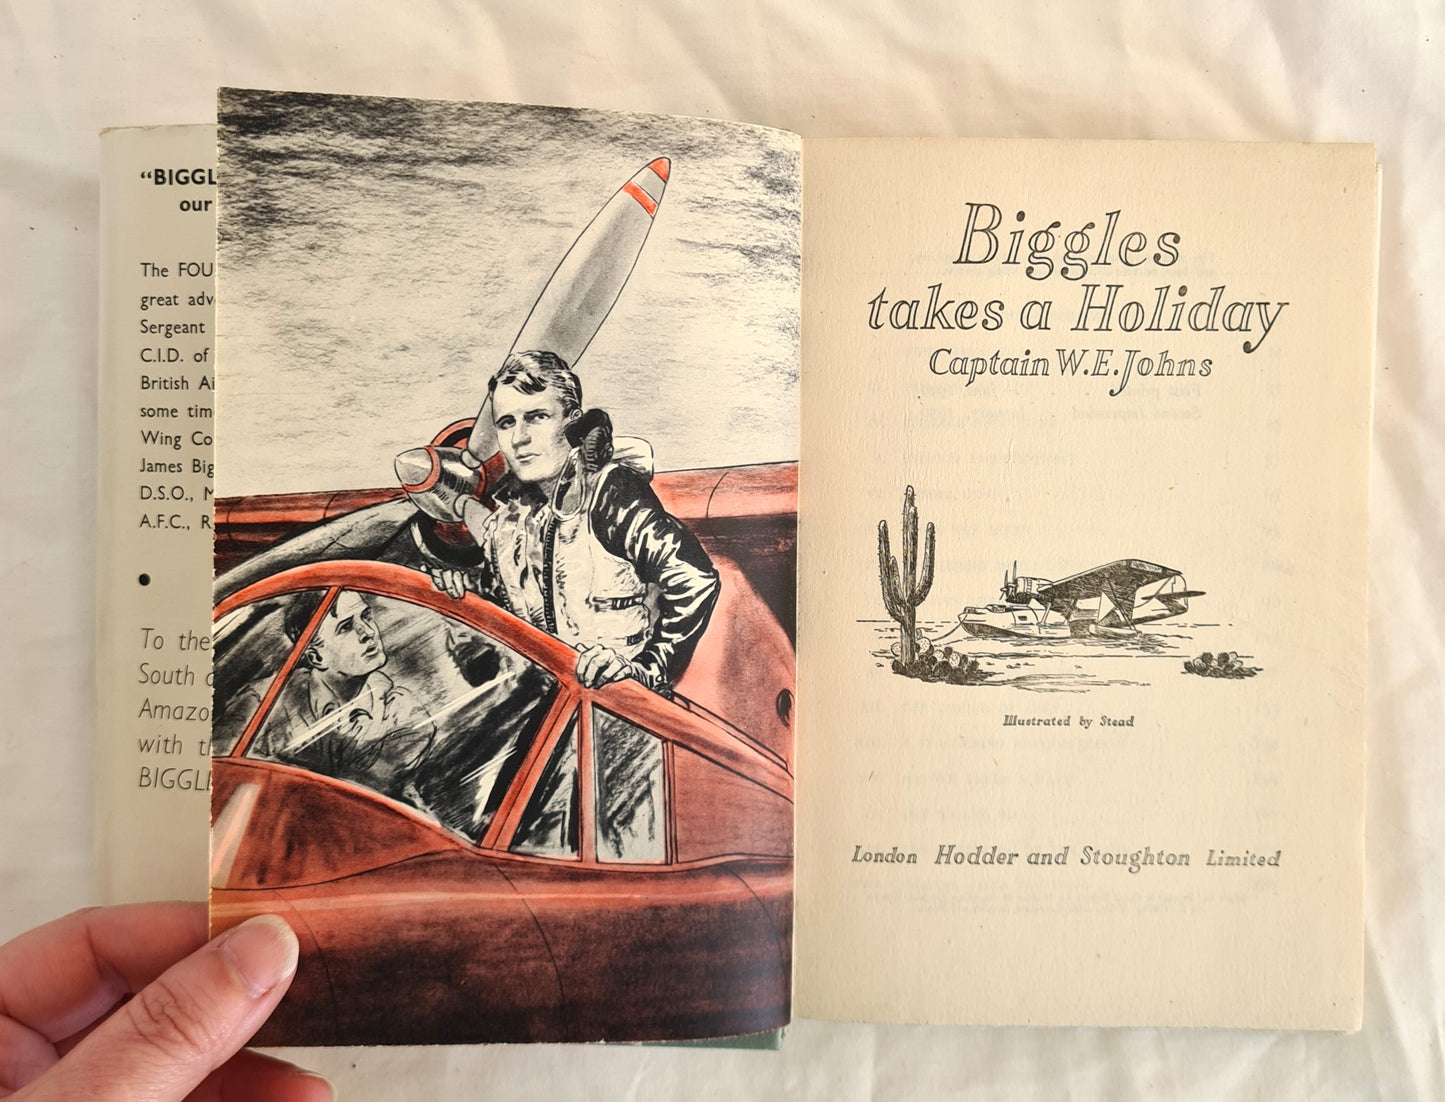 Biggles Takes a Holiday by Captain W. E. Johns (dj)